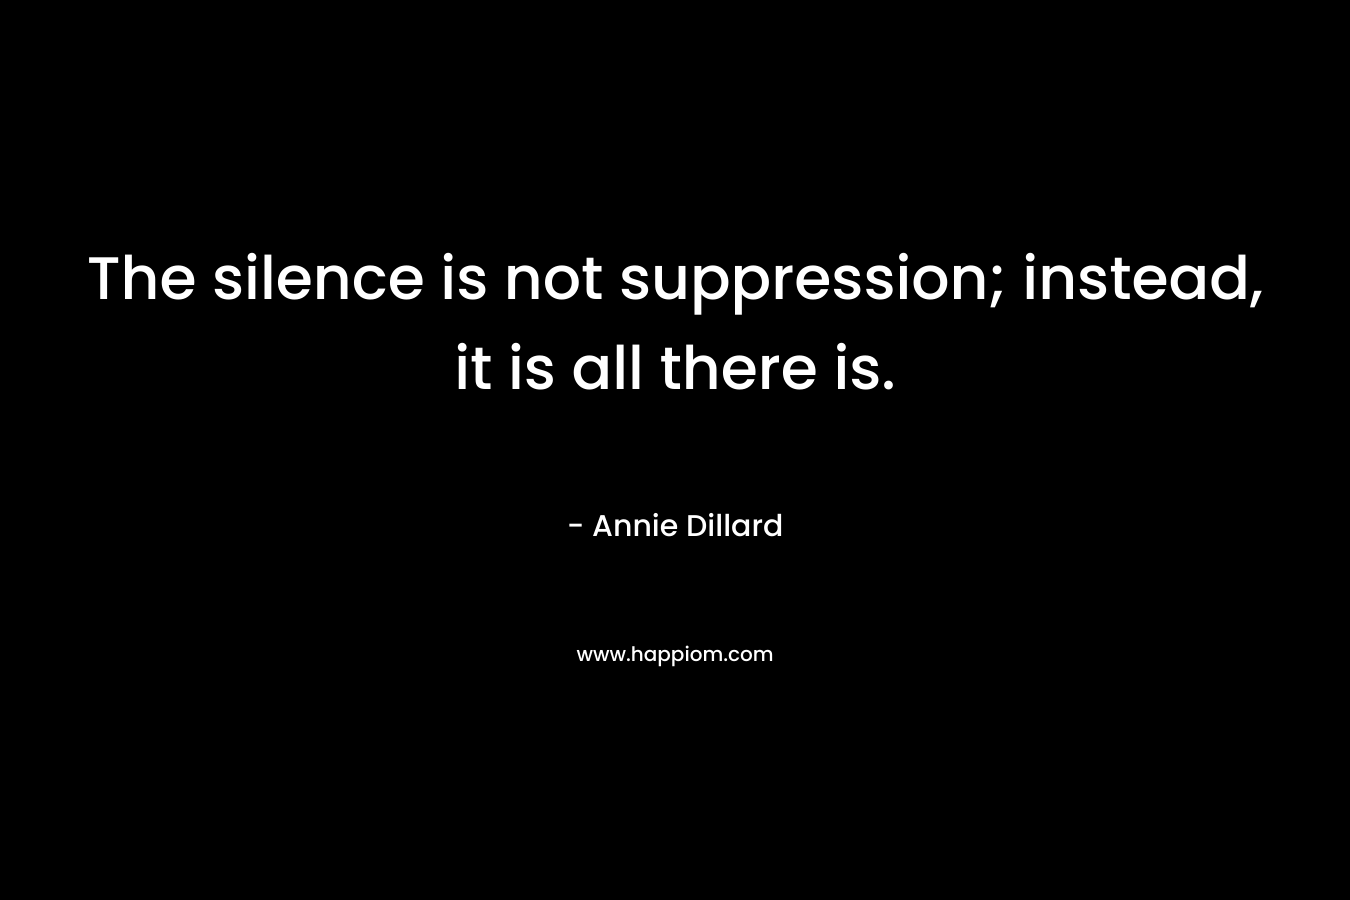 The silence is not suppression; instead, it is all there is. – Annie Dillard